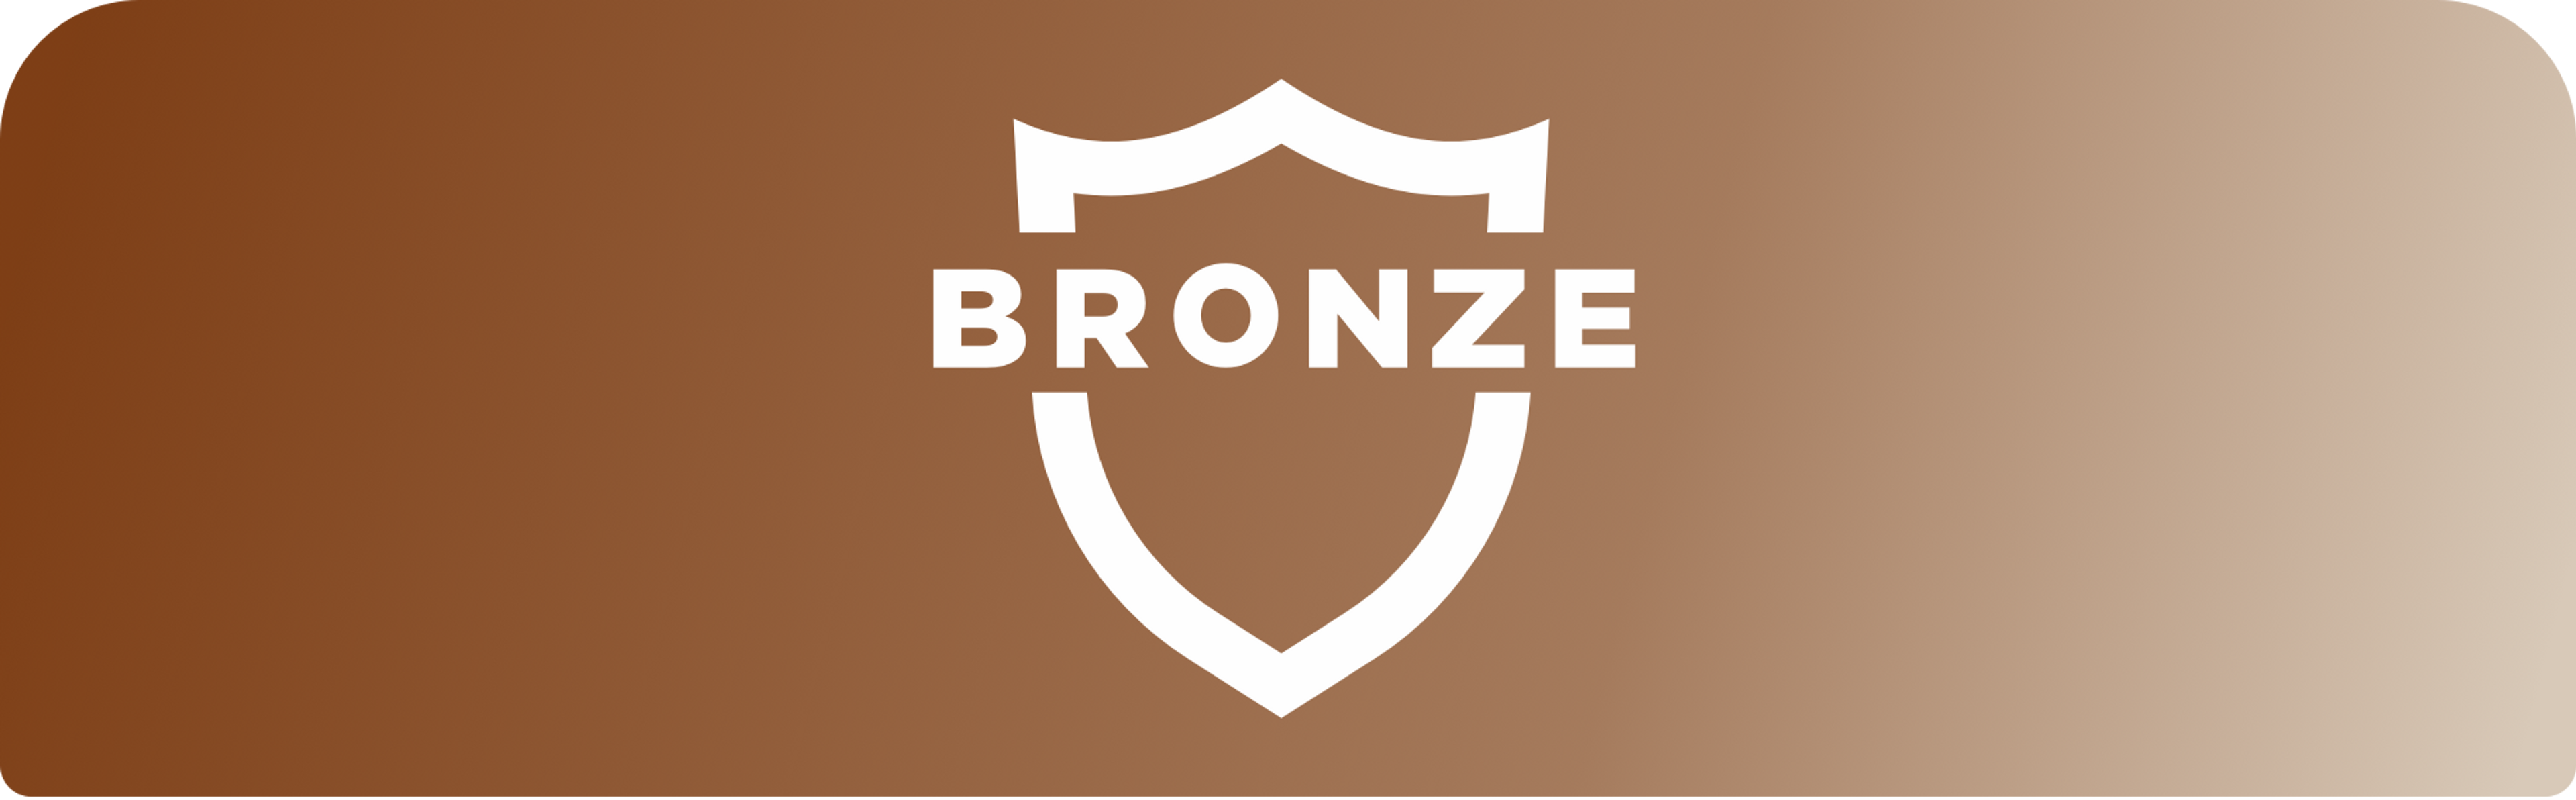 Image with brown background and white icon of a shield with words " BRONZE" in capital letters at its center